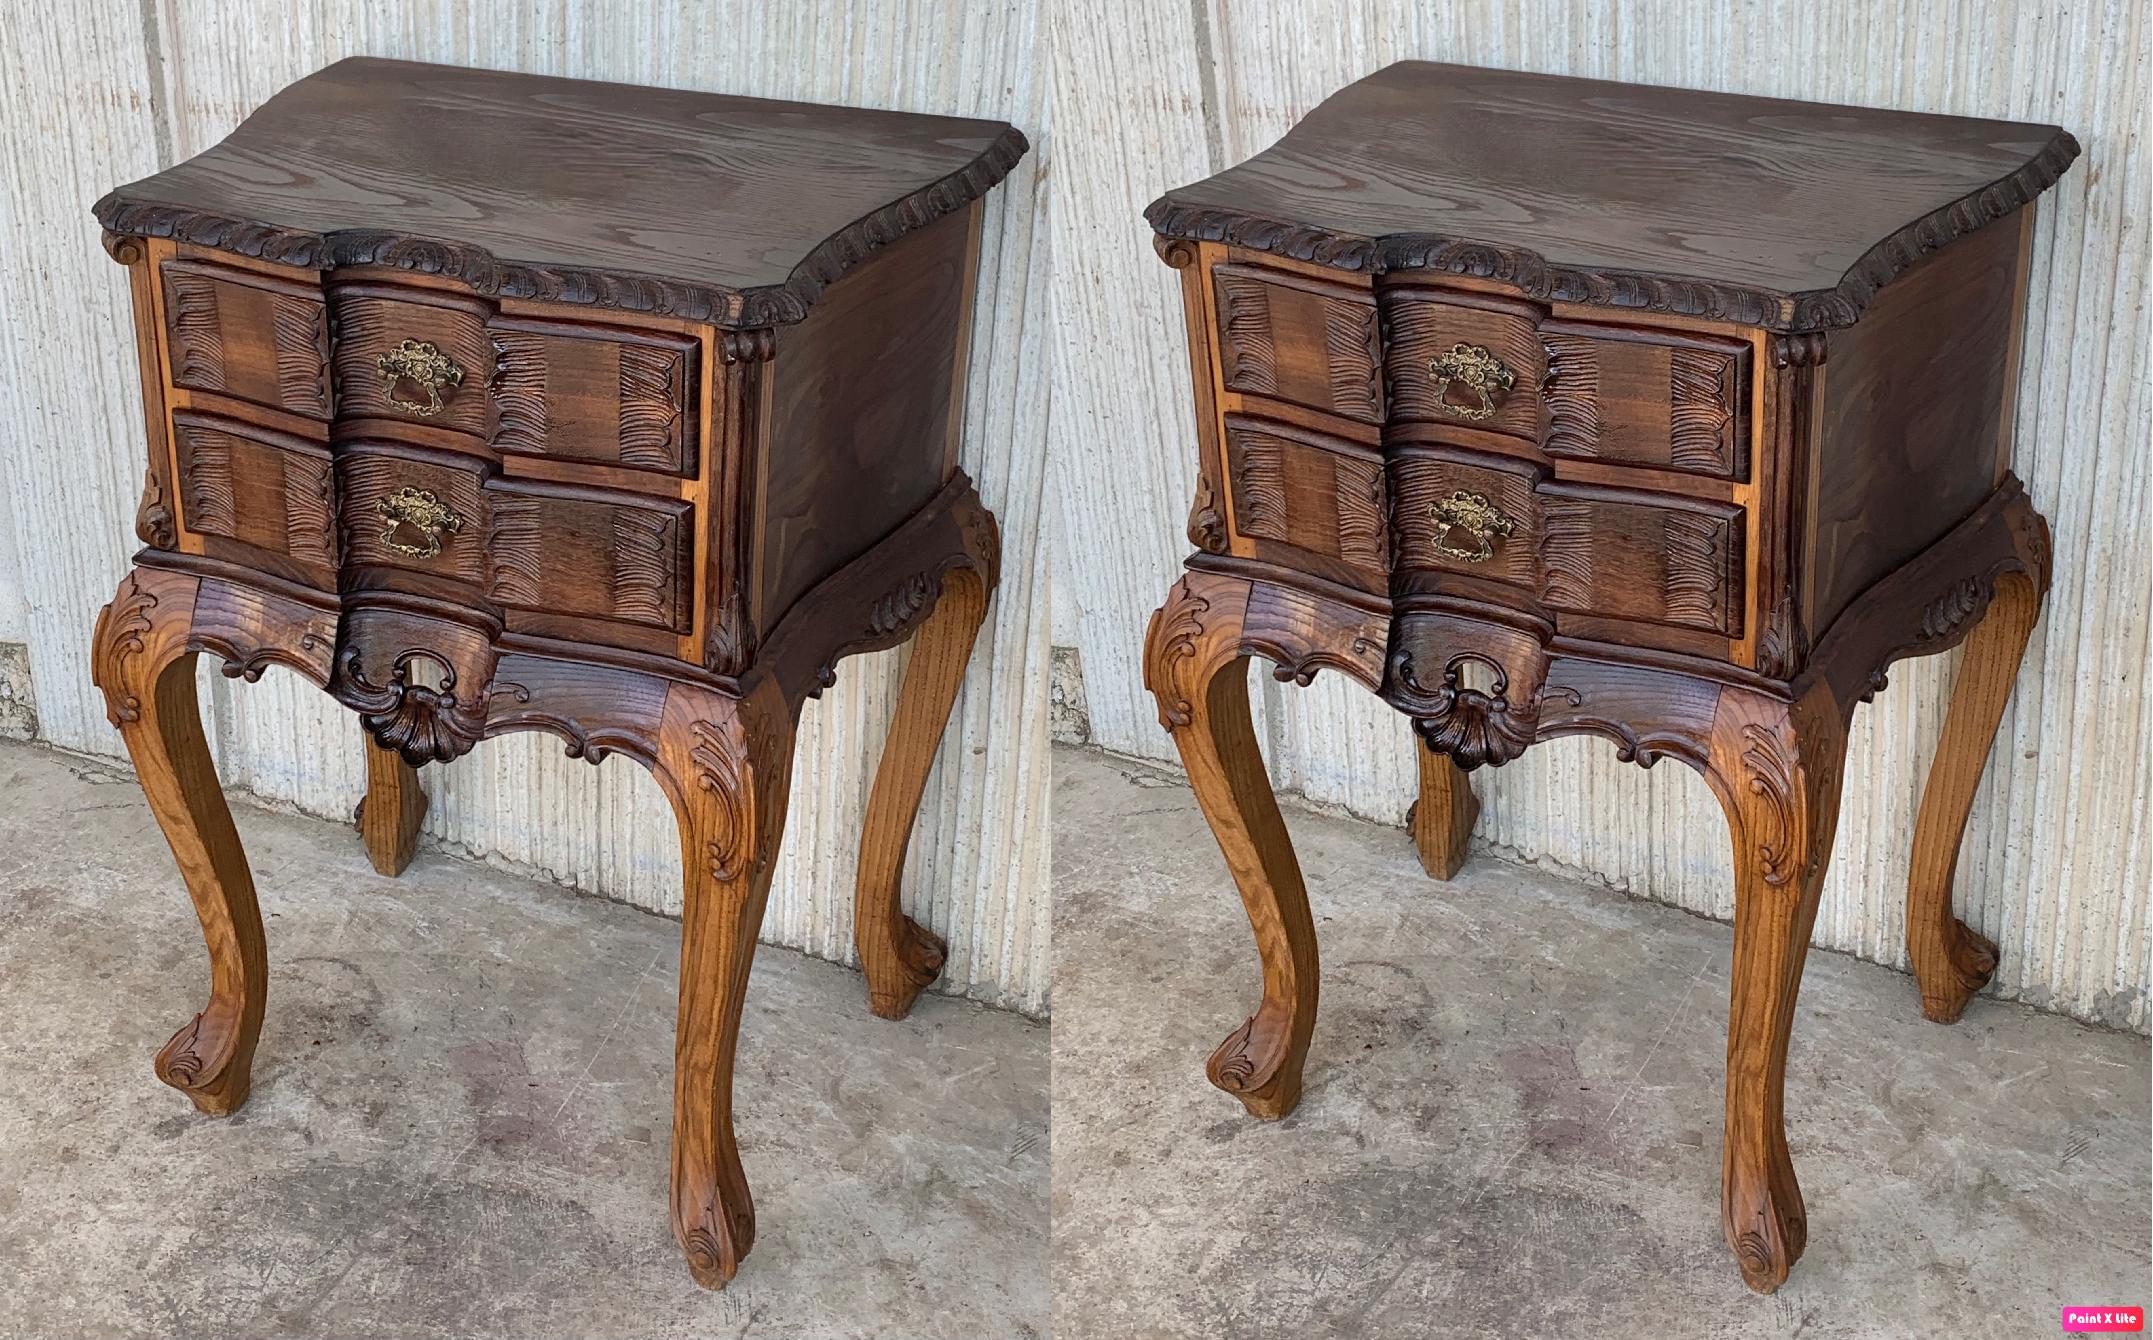 A French chestnut two-drawer commode from the late-19th century with ribbon-carved moldings and carved skirt. This petite French commode features a rectangular top with beveled edges, sitting above two exquisite drawers, each simply adorned with a